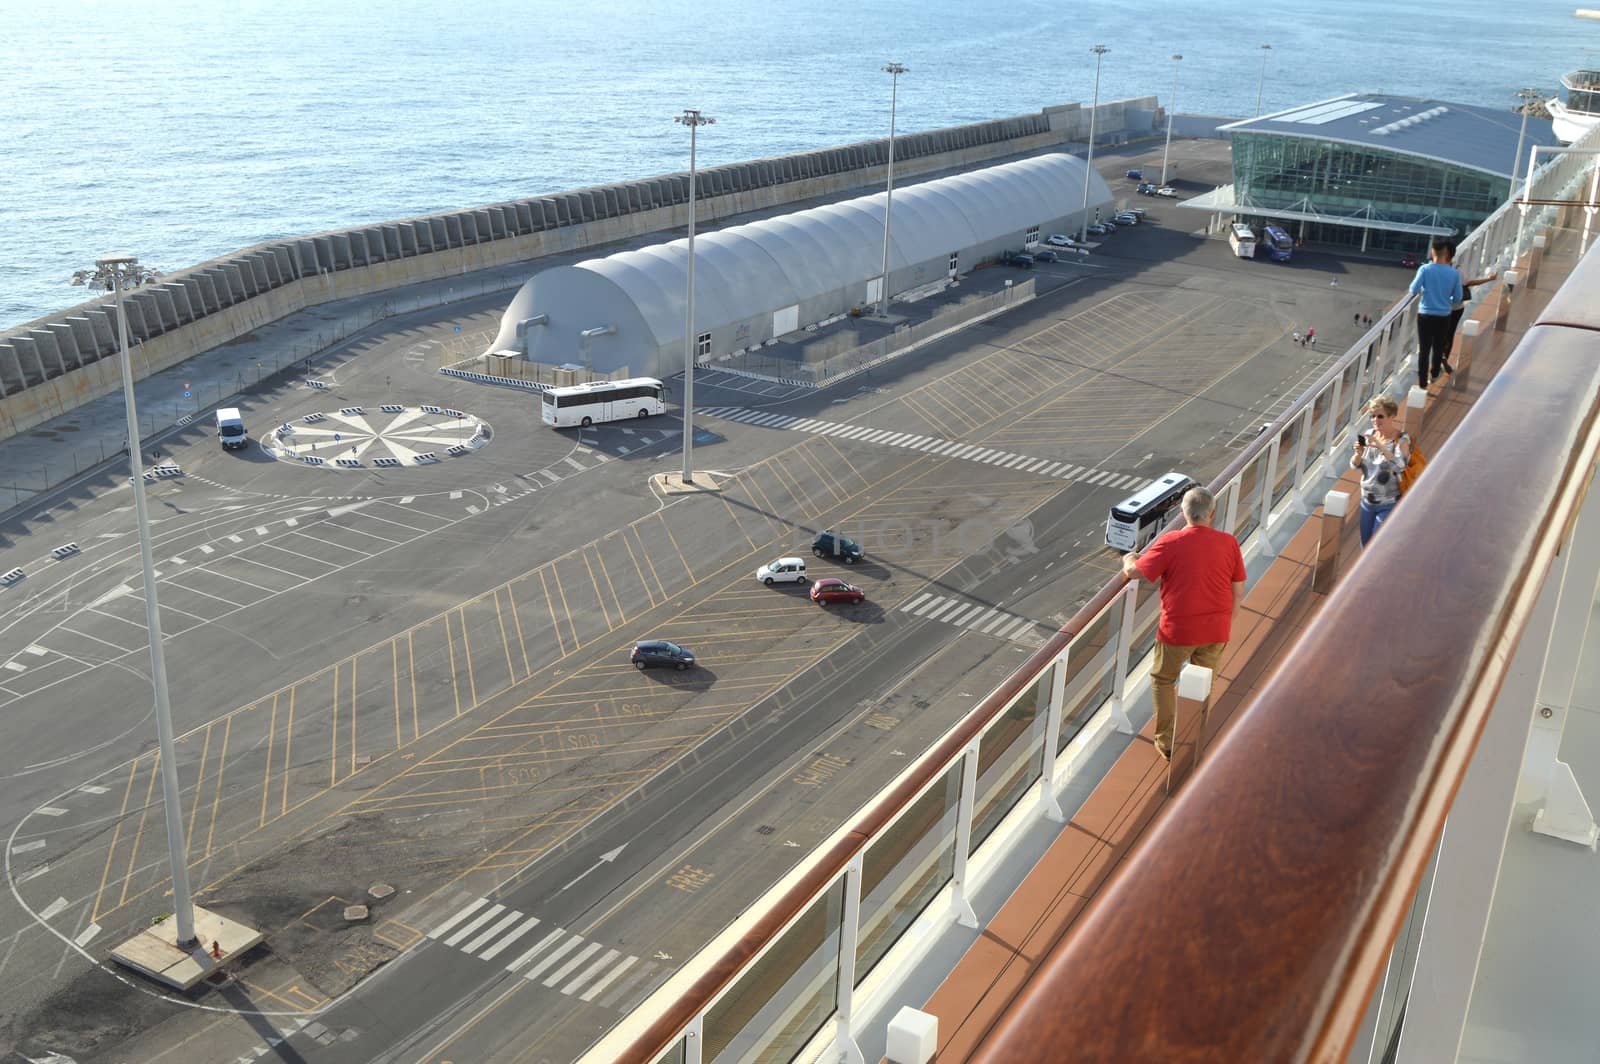 Parking and terminal scene from the cruise ship, top view, Civitavecchia, Italy, 7 October 2018 by claire_lucia